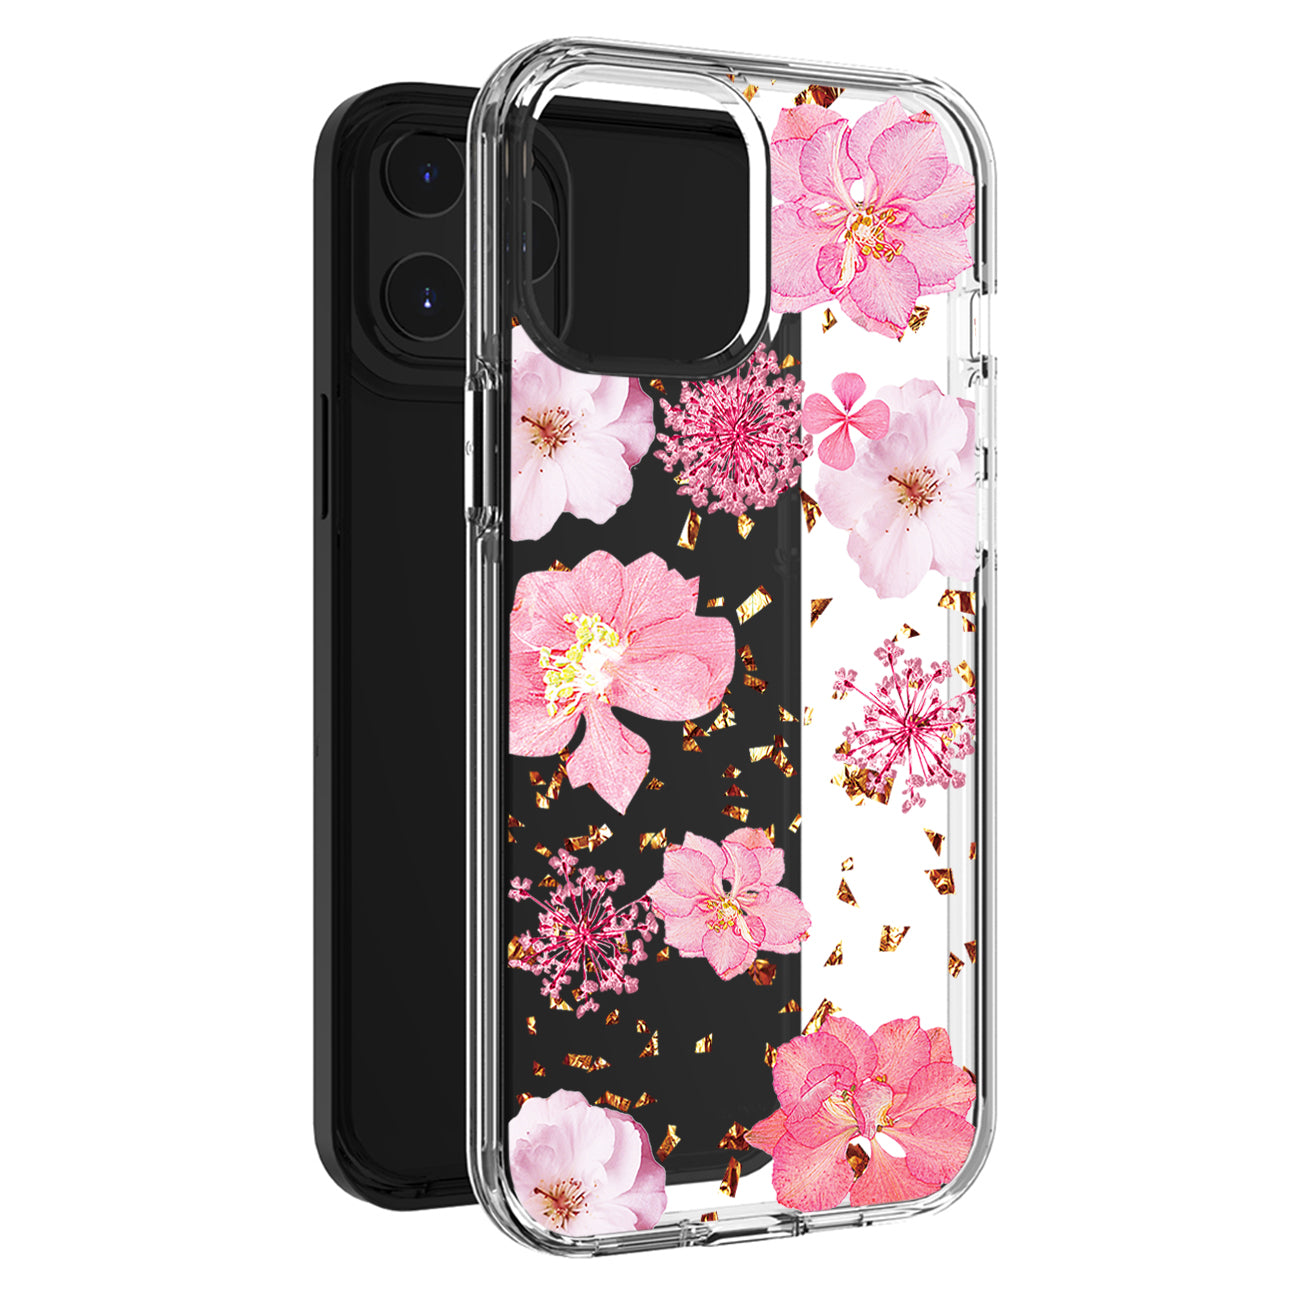 Pressed dried flower Design Phone case For iPhone 14 Pro Max In Pink